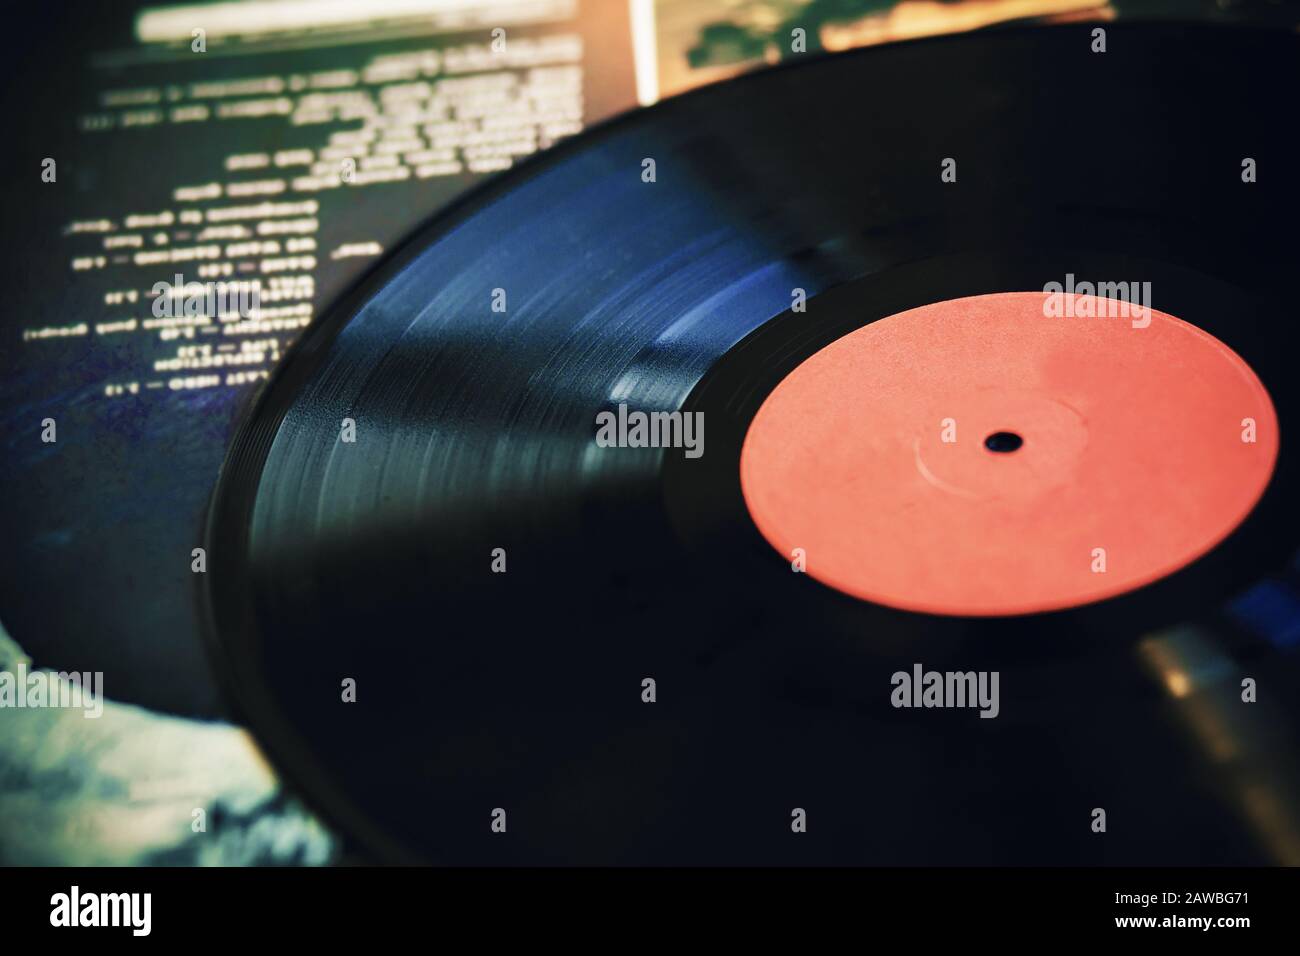 An old vintage black vinyl record lies on the cover of a music album with the playlist's text on it. Stock Photo